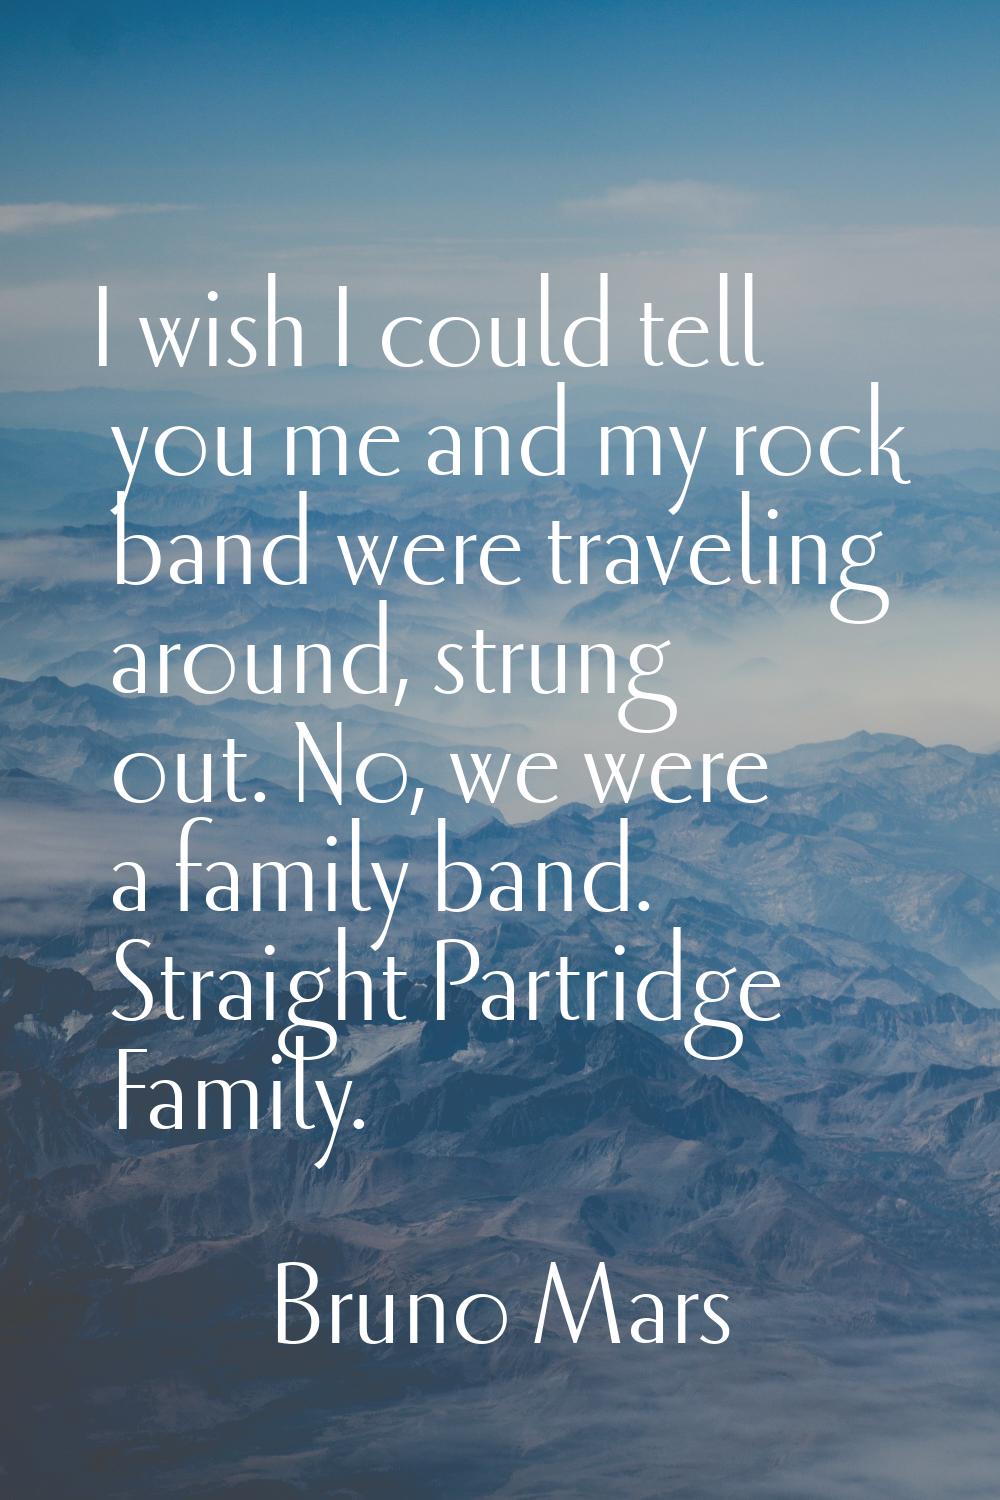 I wish I could tell you me and my rock band were traveling around, strung out. No, we were a family